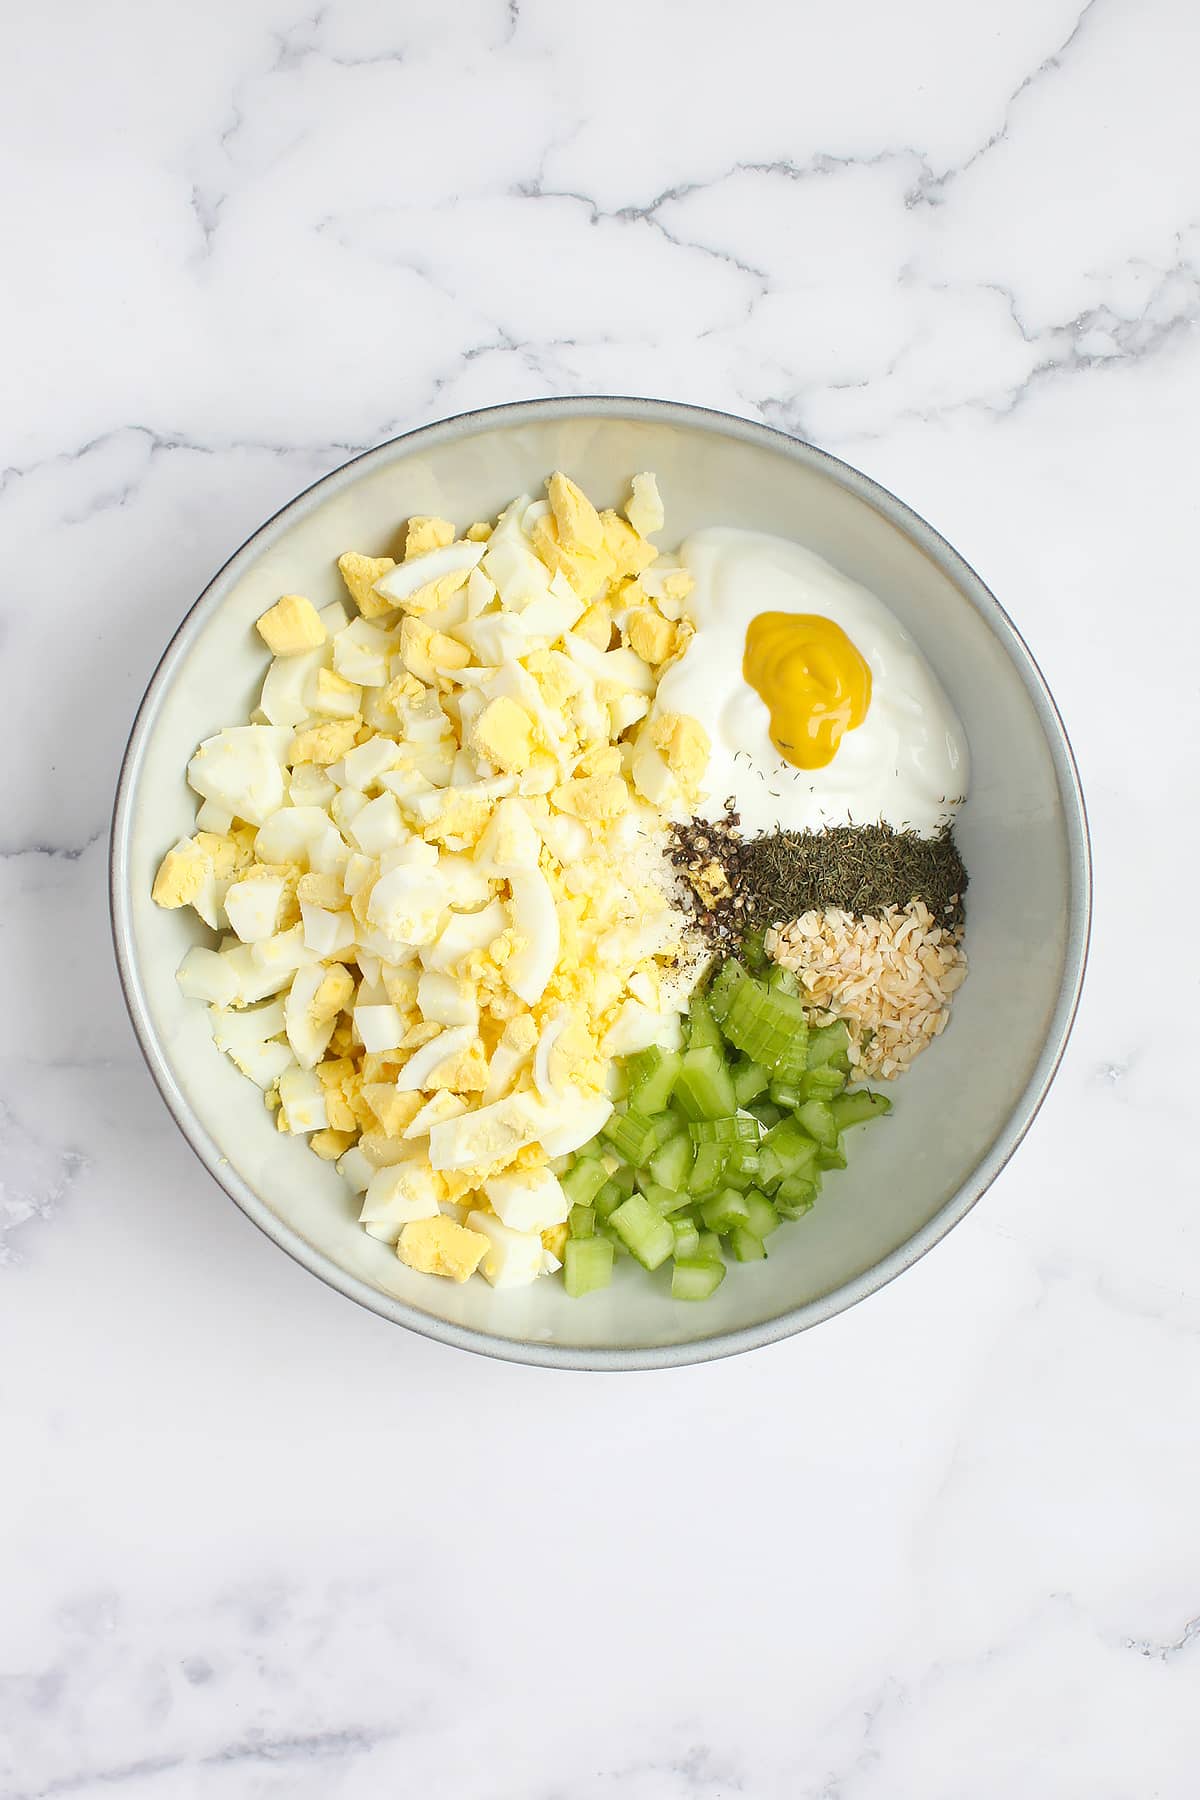 A mixing bowl with all of the ingredients for homemade egg salad.